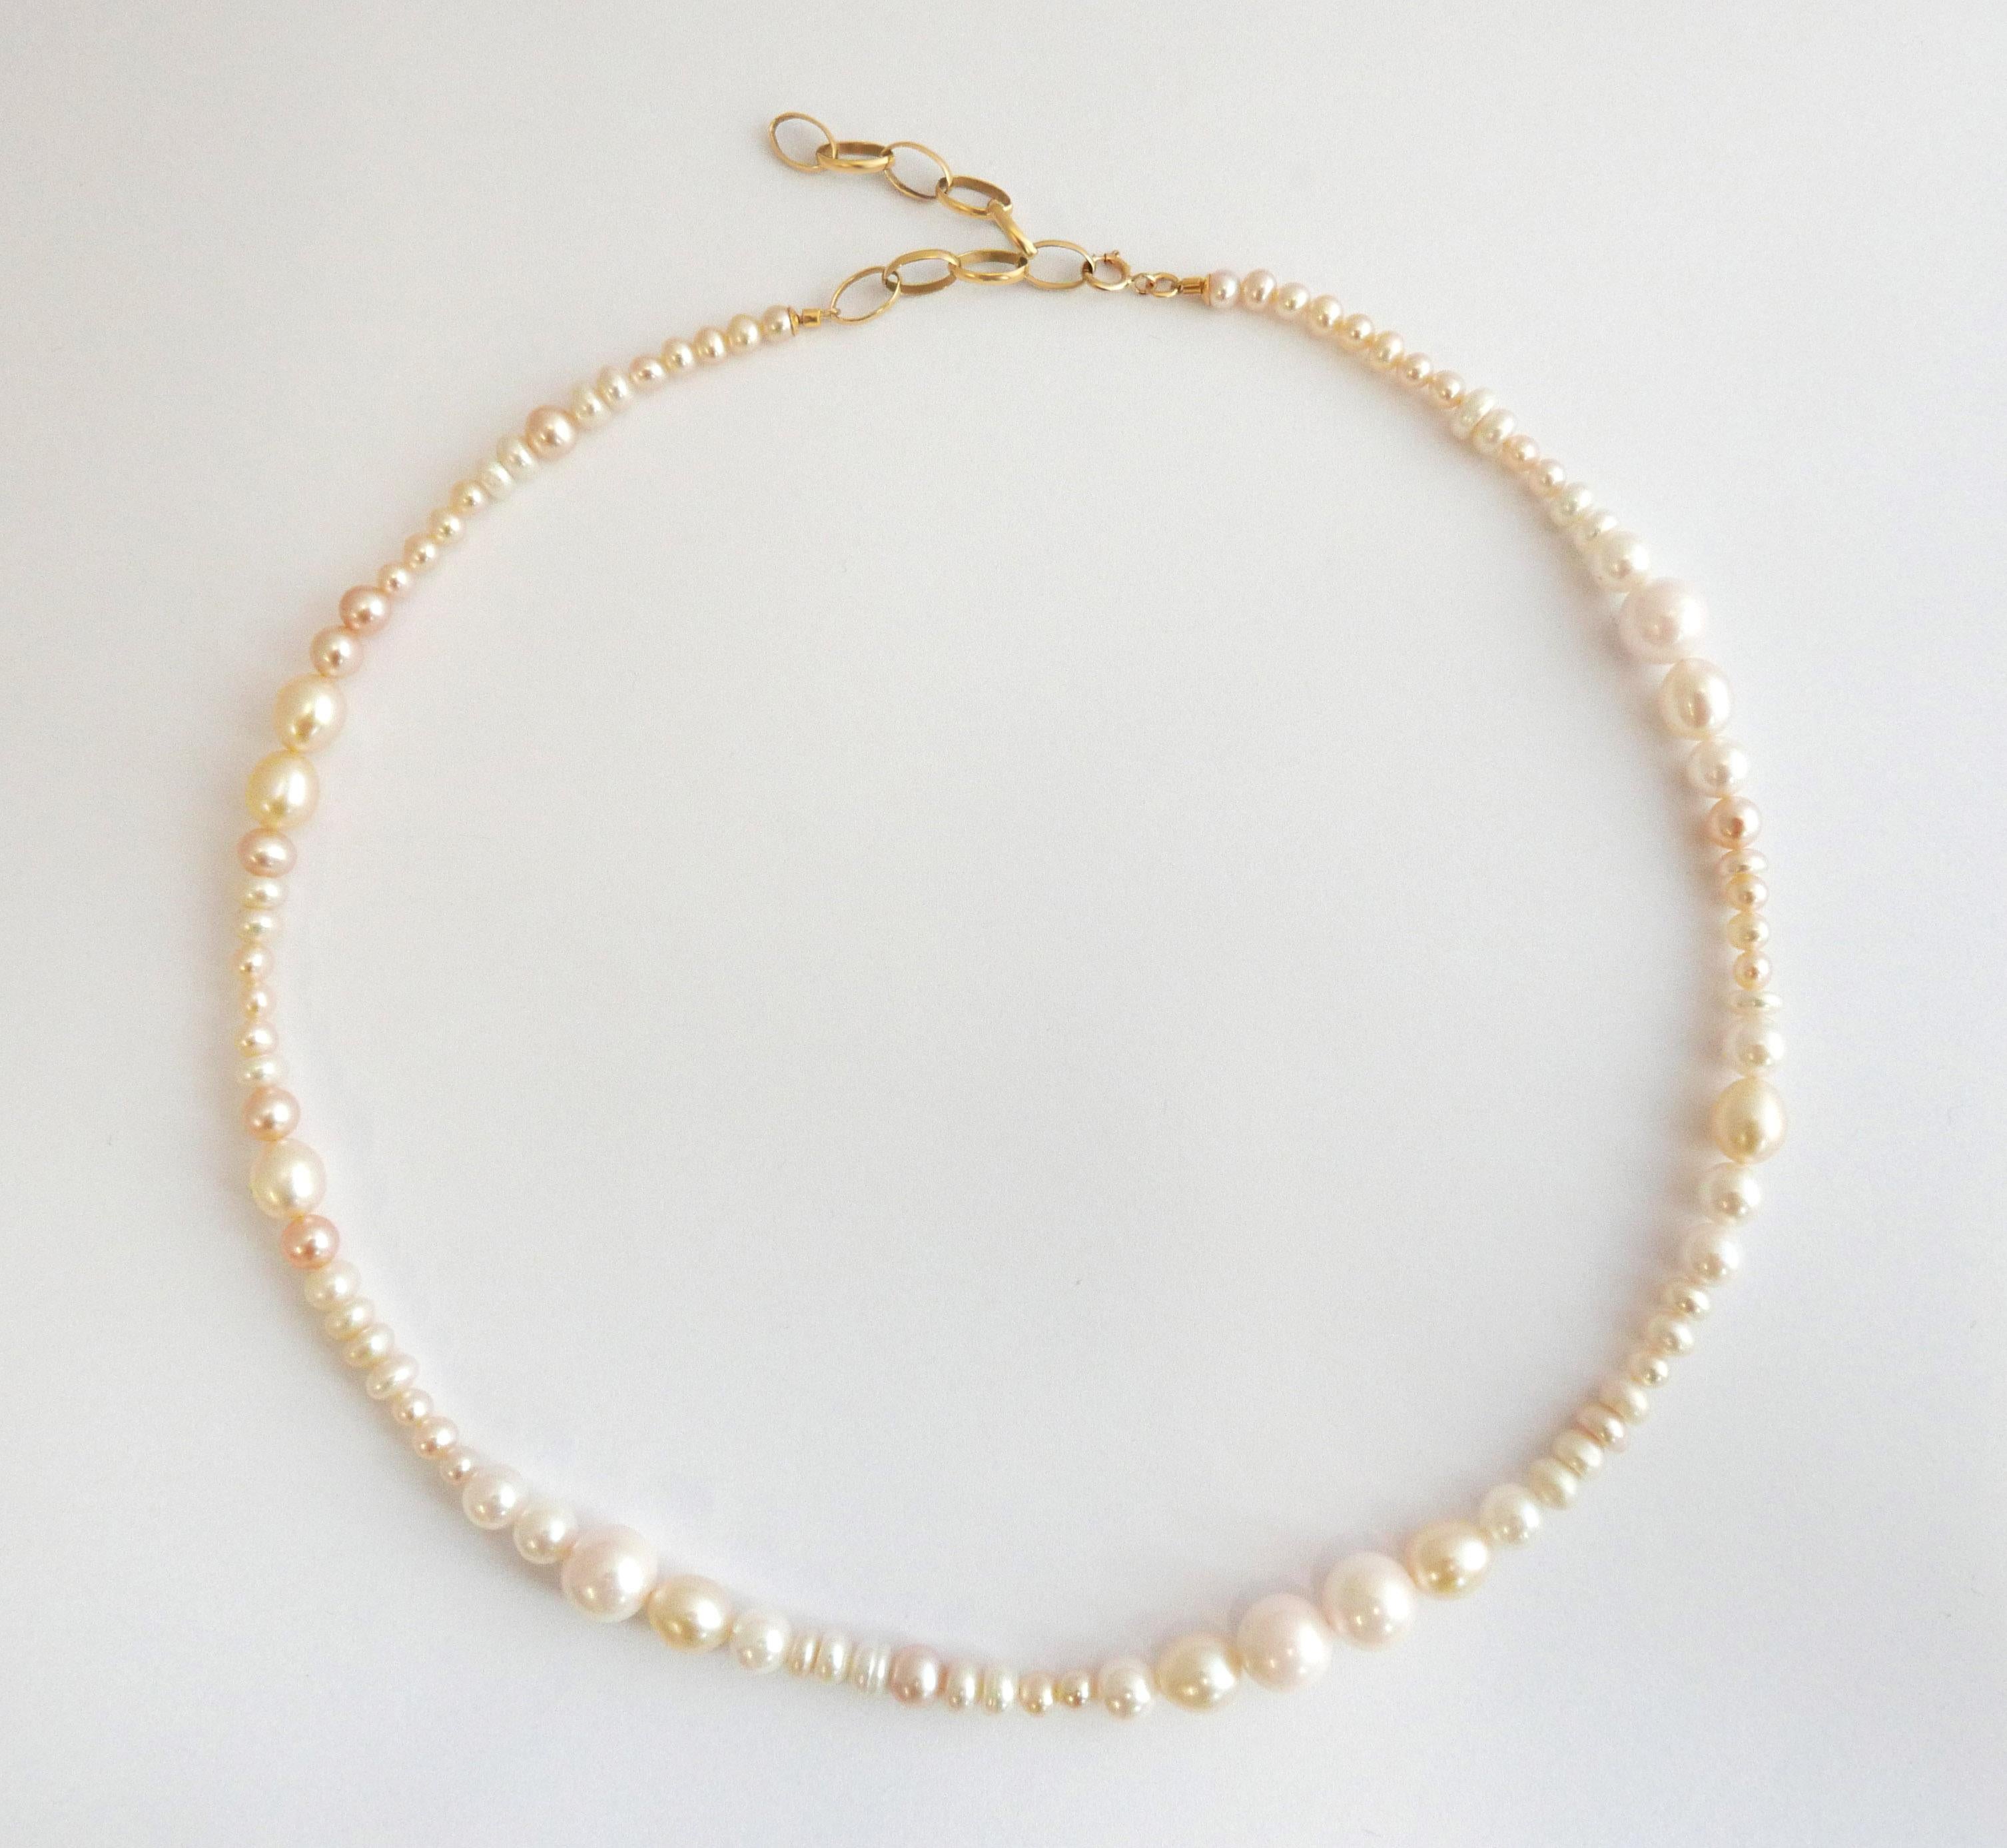 This freshwater pearl necklace features an arrangement of mixed sizes, shapes and subtly varying tones of freshwater pearls for a fresh and modern effect.  The pearls range in tone from pale blush to cream and in size from 4mm to 8mm in diameter.